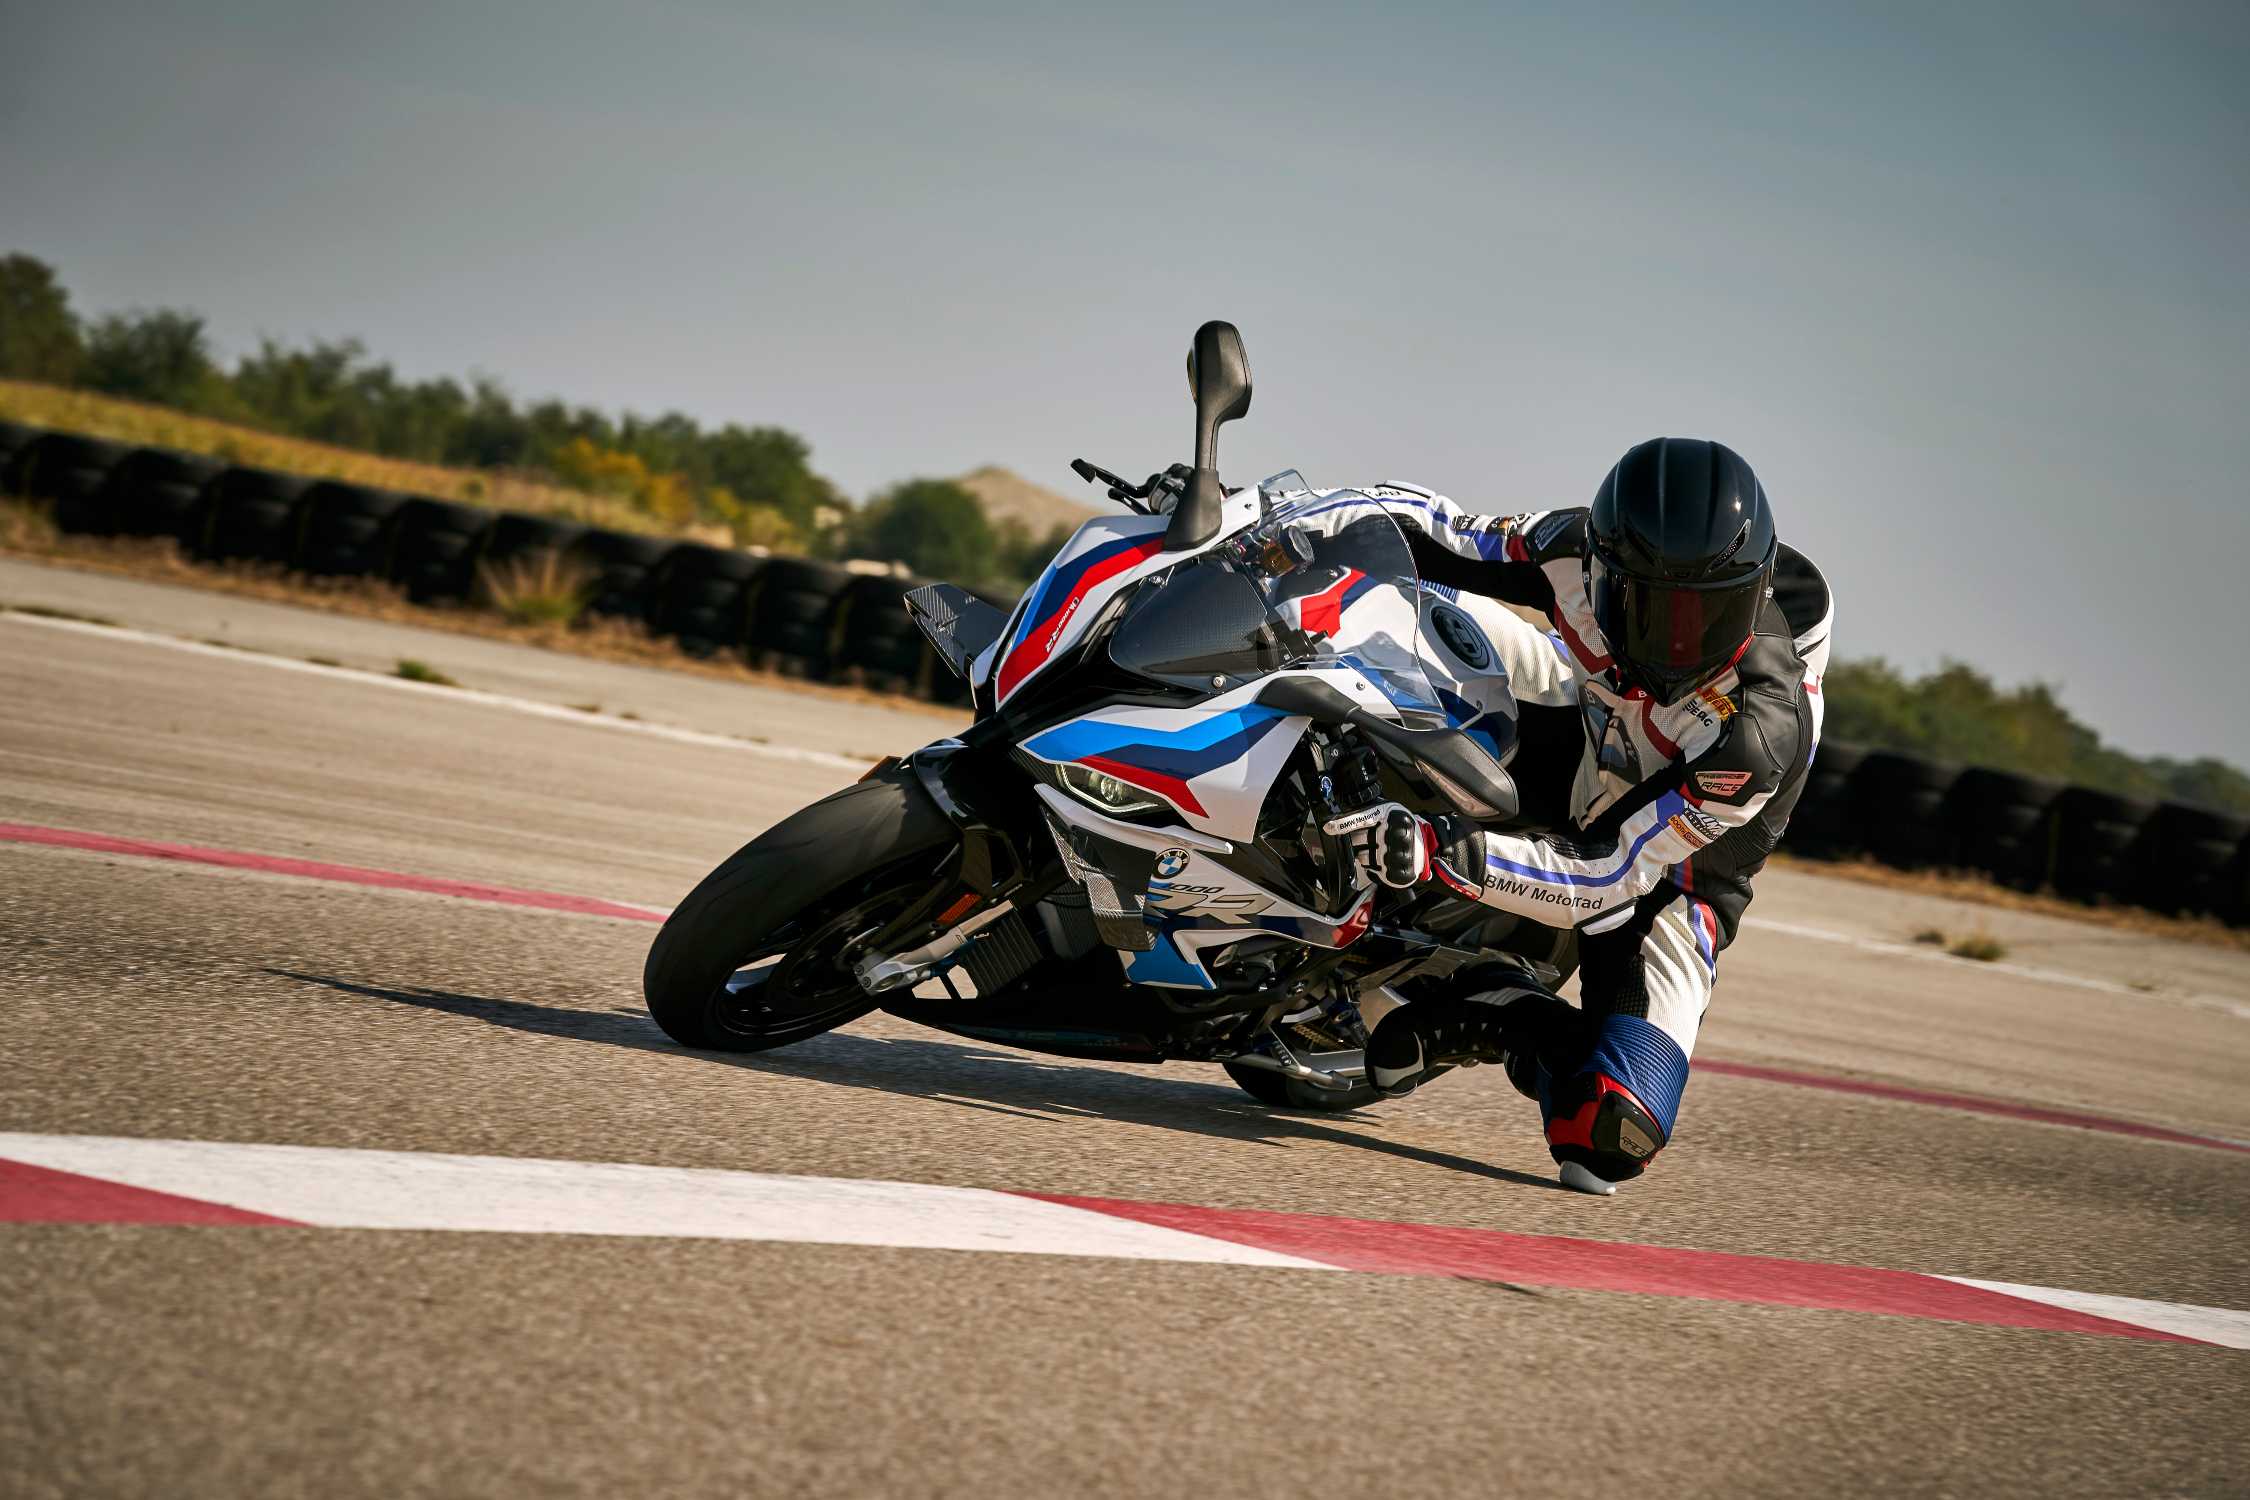 The new BMW M 1000 RR. (09/2020)